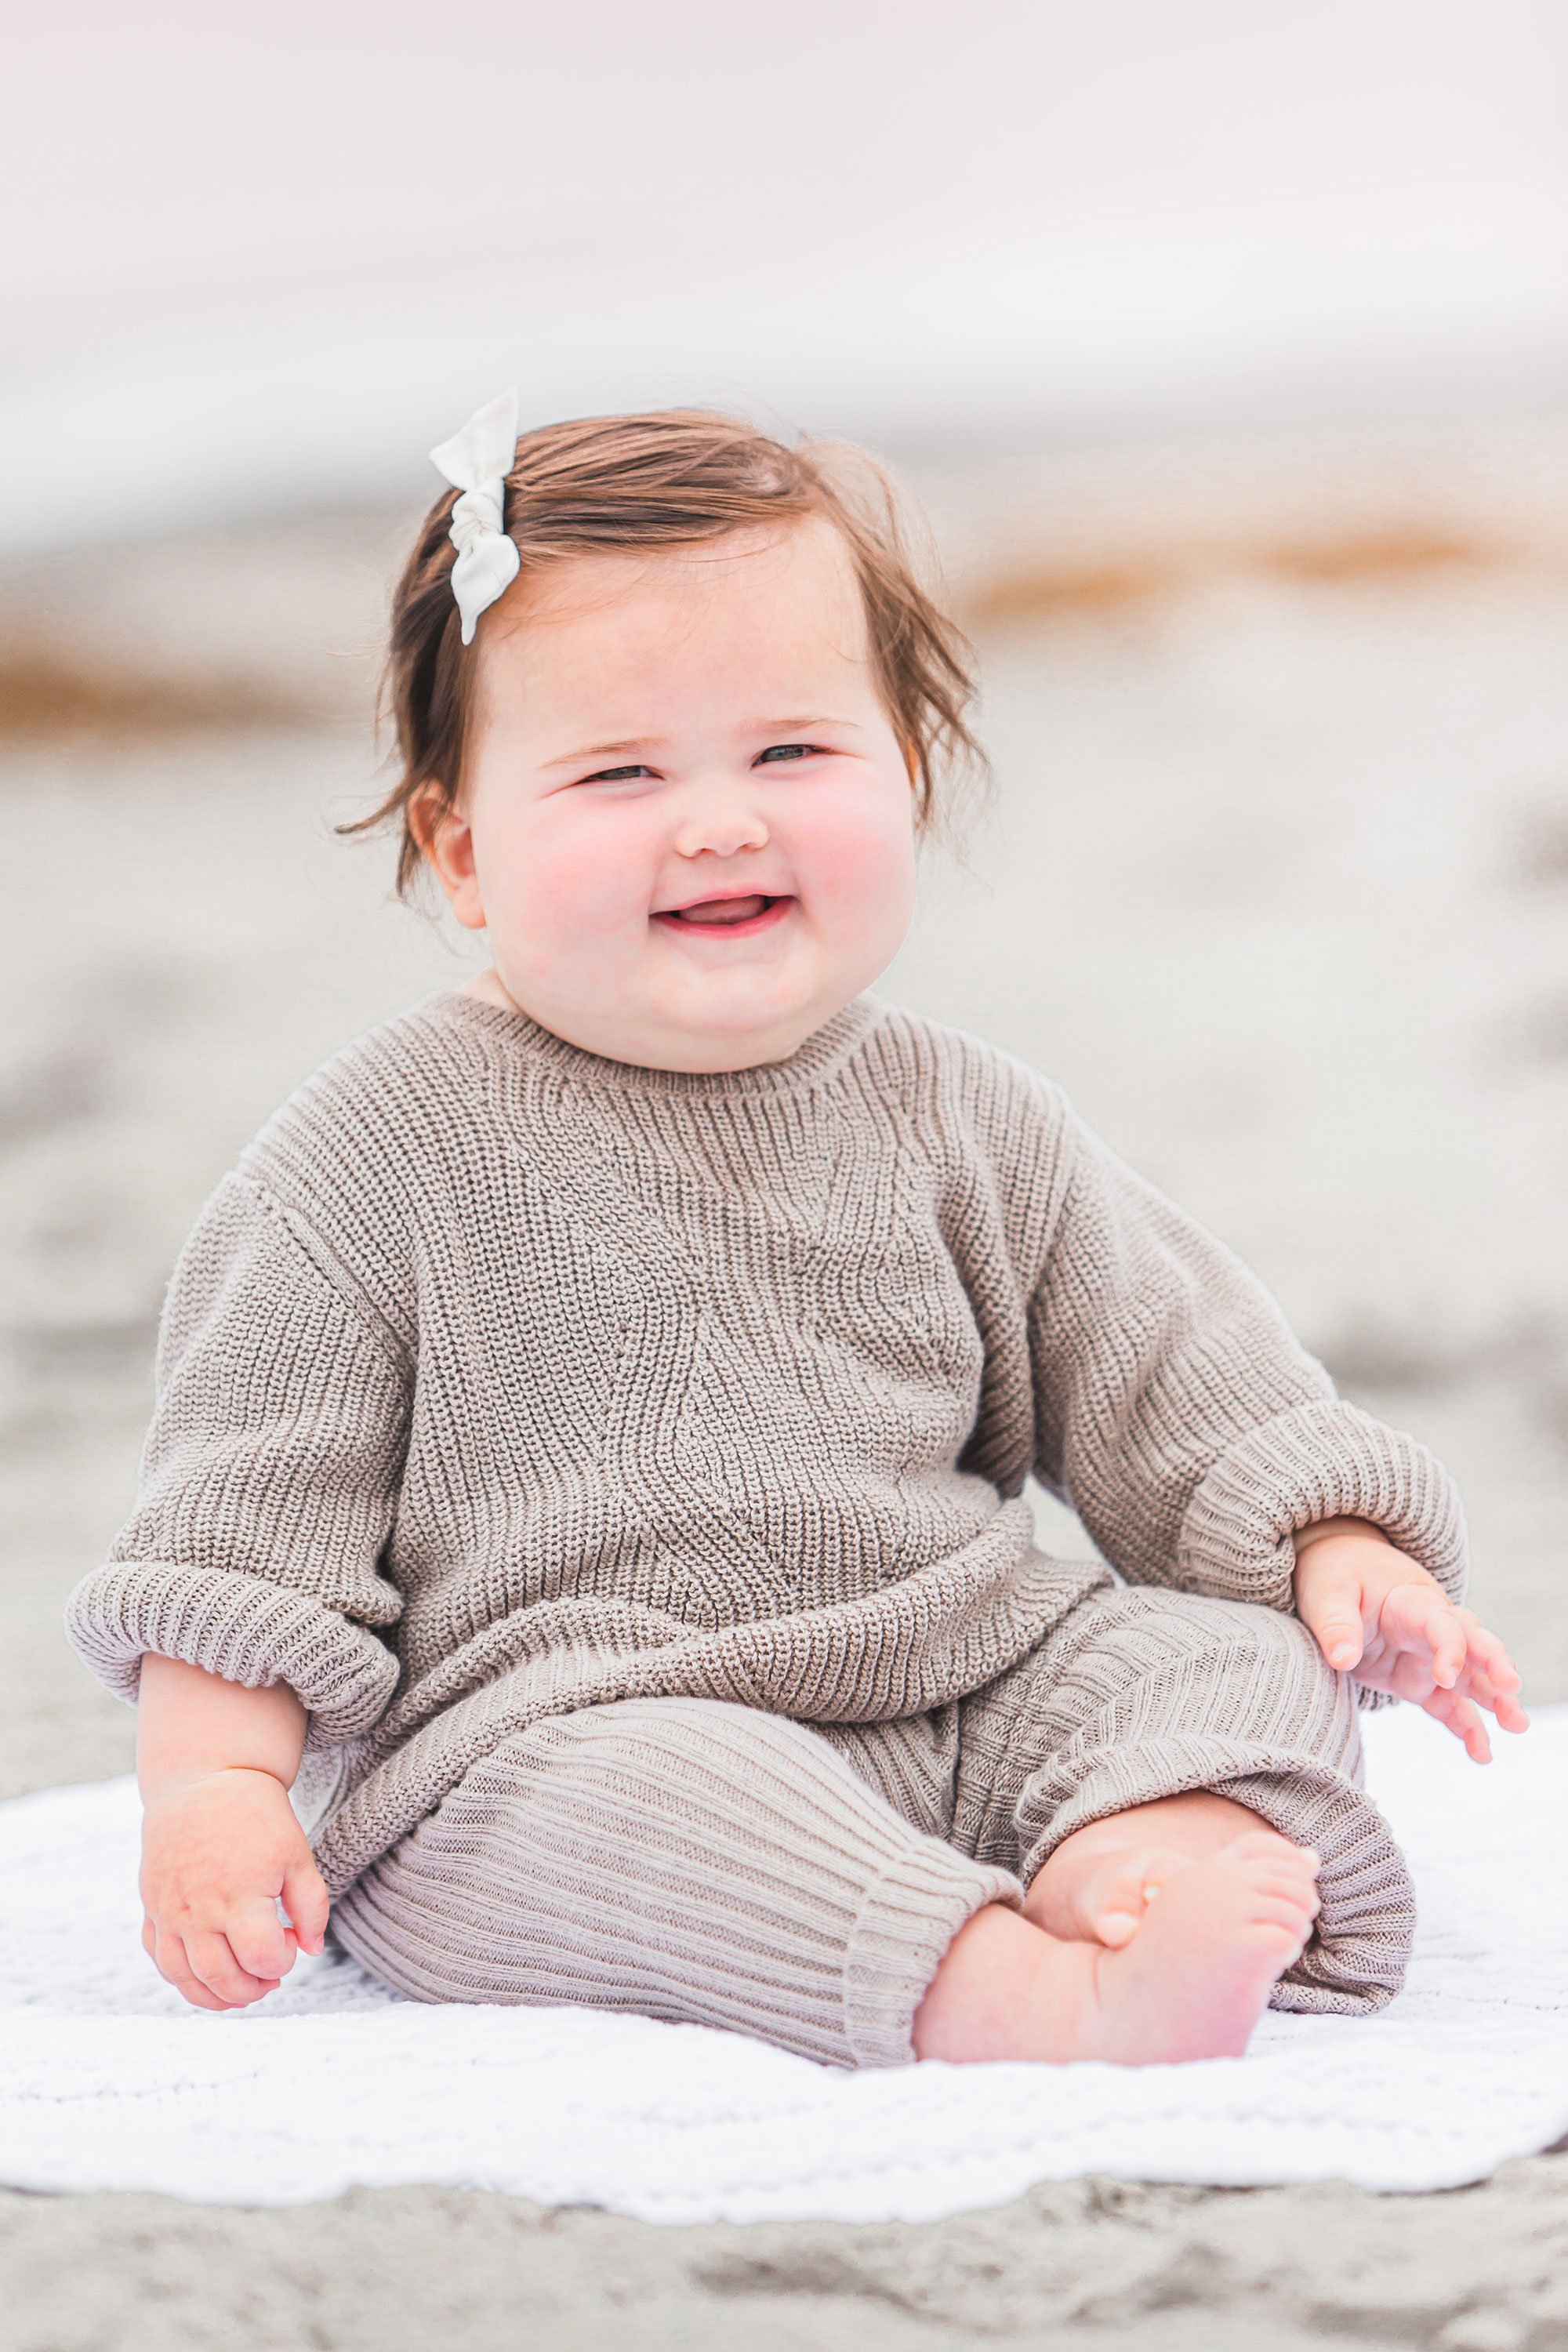 Rye Beach Family Session | Stephen Grant Photography